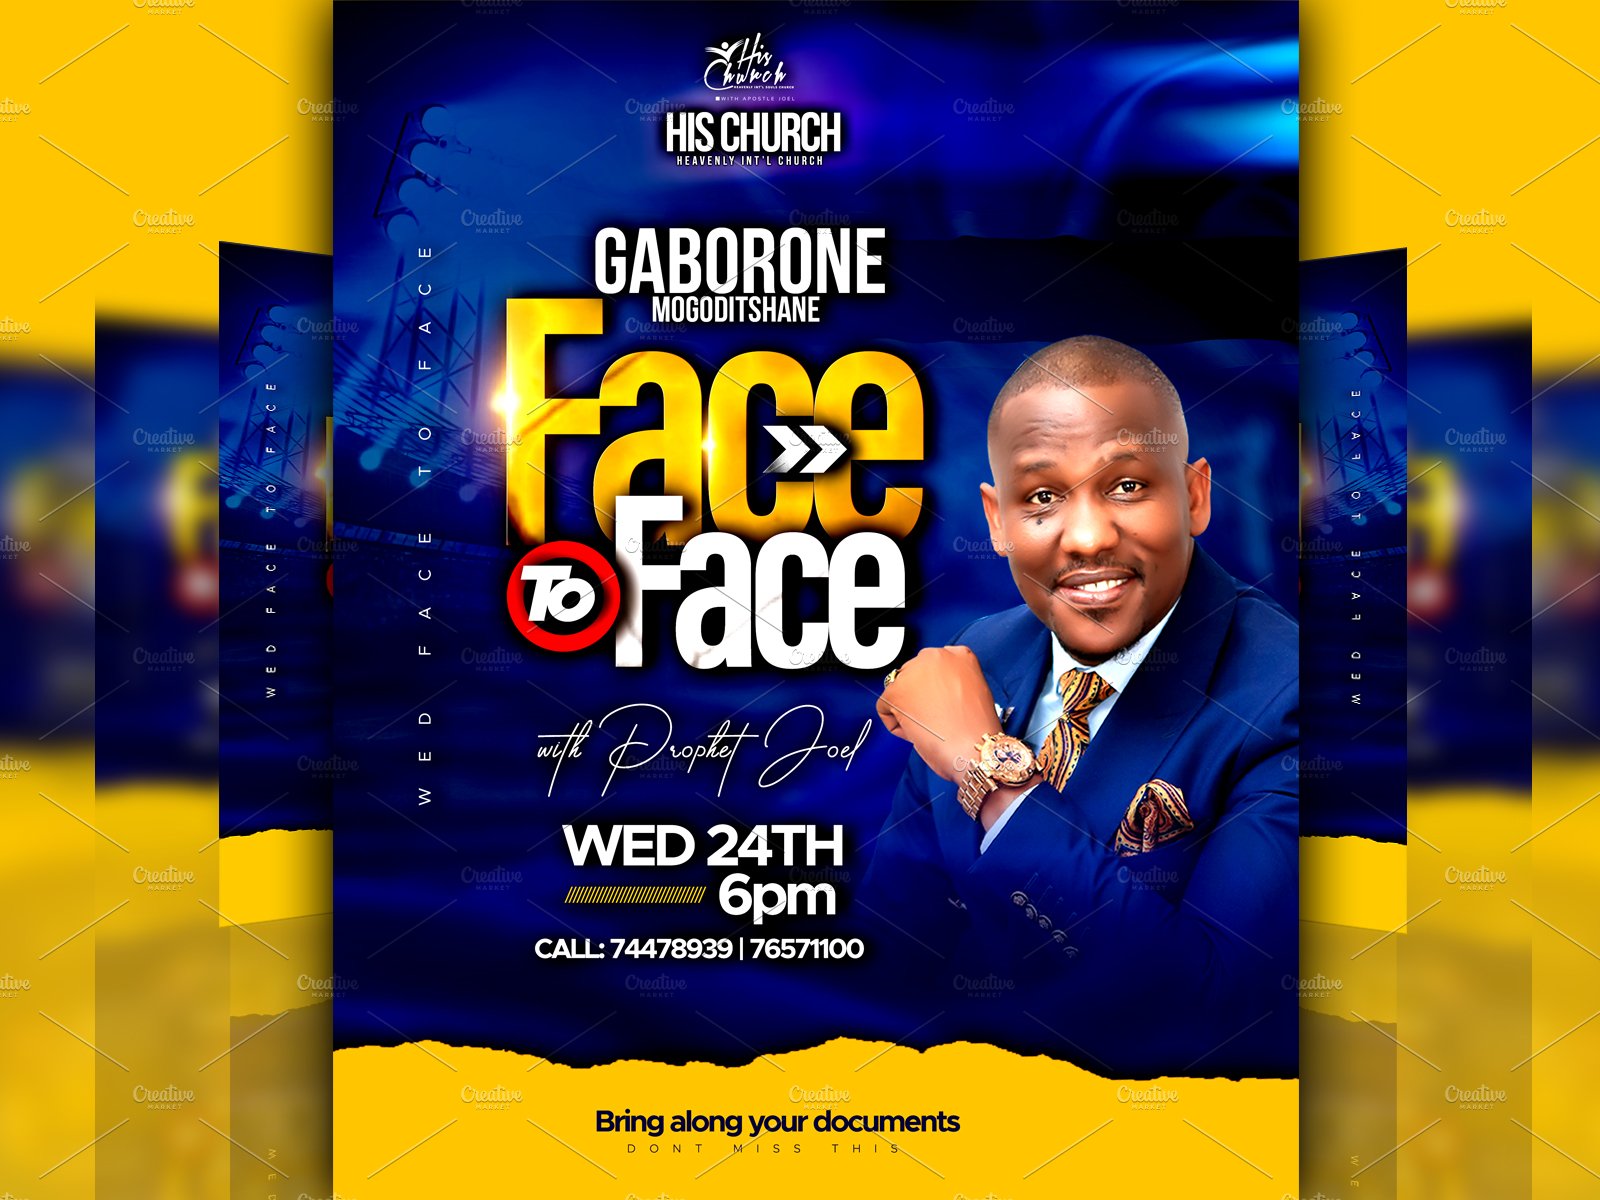 Face to face Church flyer templates cover image.